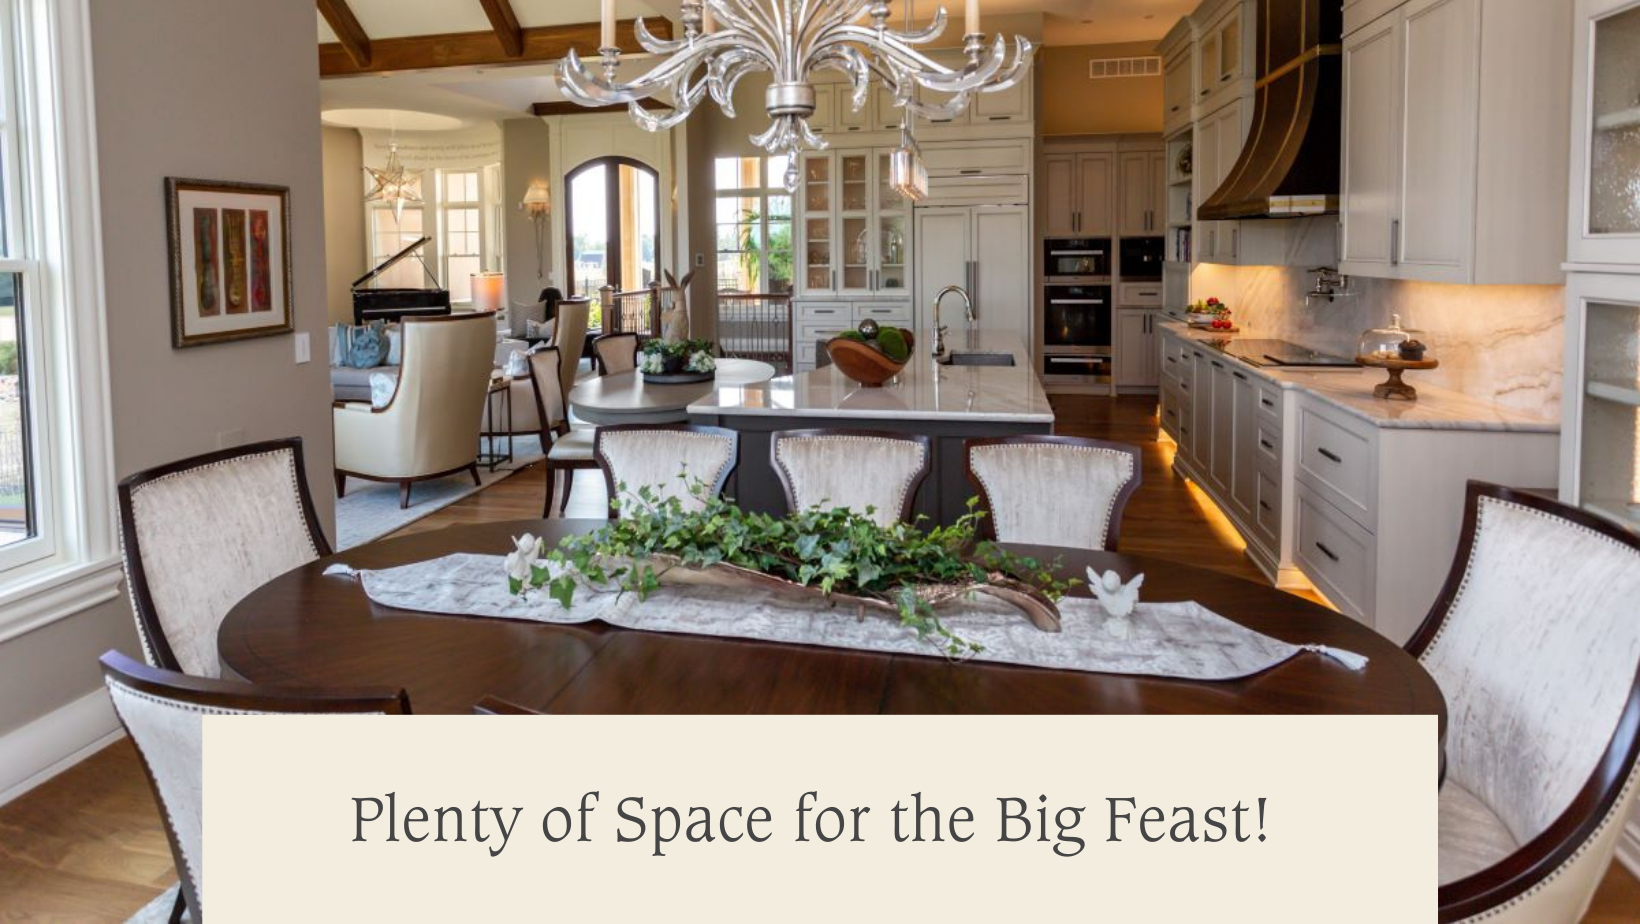 Plenty of Space for the Big Feast!